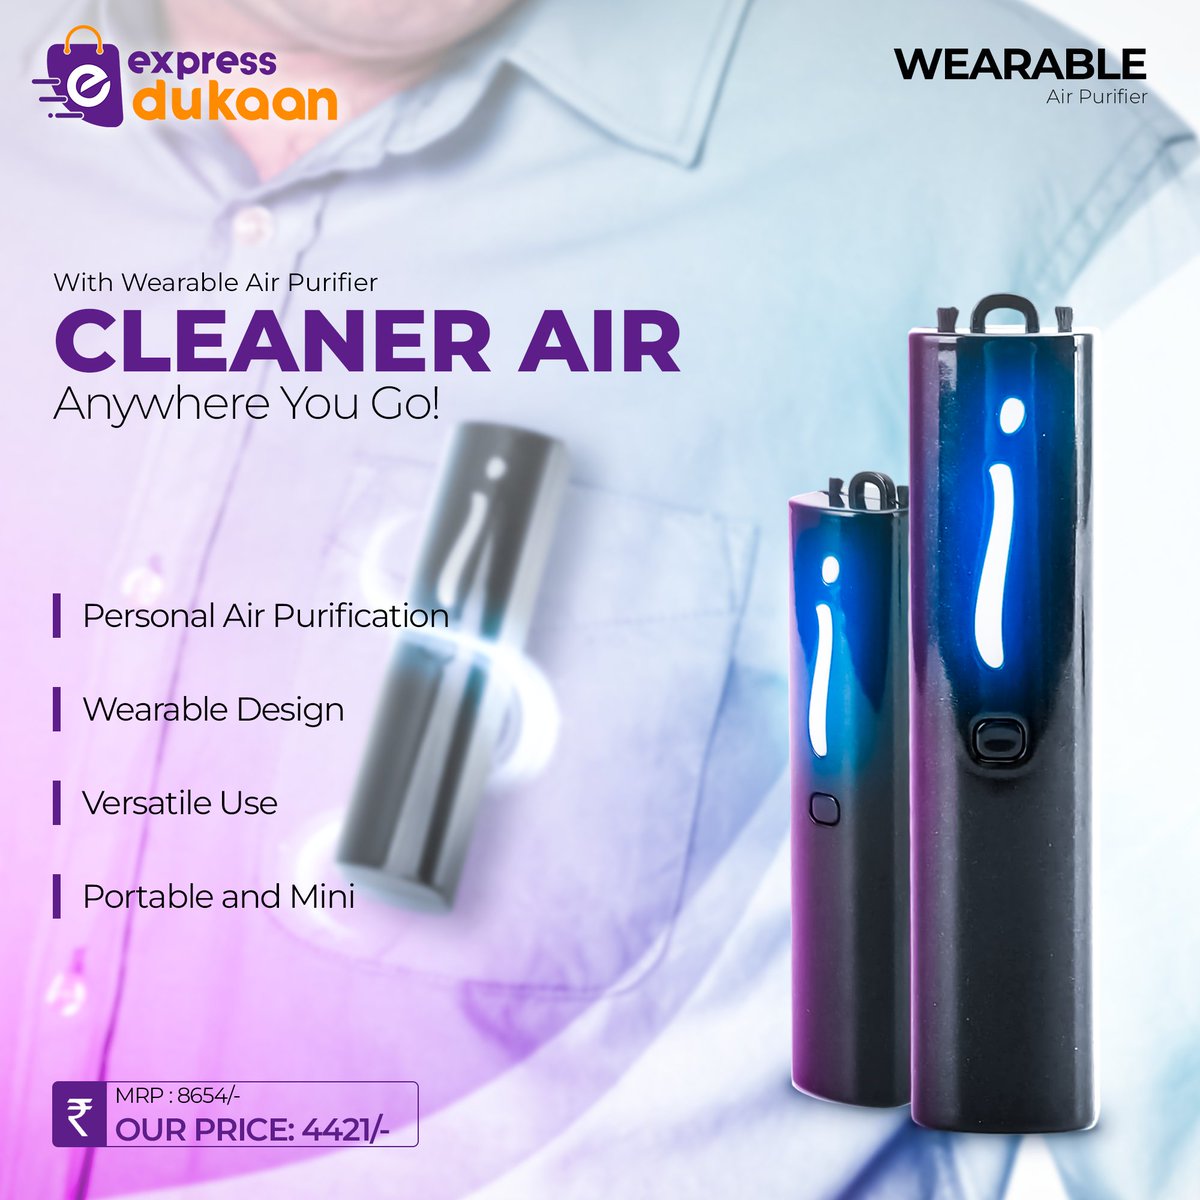 Breathe Clean Air Wherever You Go with the Wearable Negative Ion Air Purifier!
expressdukaan.com/products/weara…
.
.
#expressdukaan #wearableairpurifier #negativeion #AirPurification #portableairpurifier #CleanAir #freshair #OnTheGo #CompactDesign #Rechargeable #quietoperation #versatile